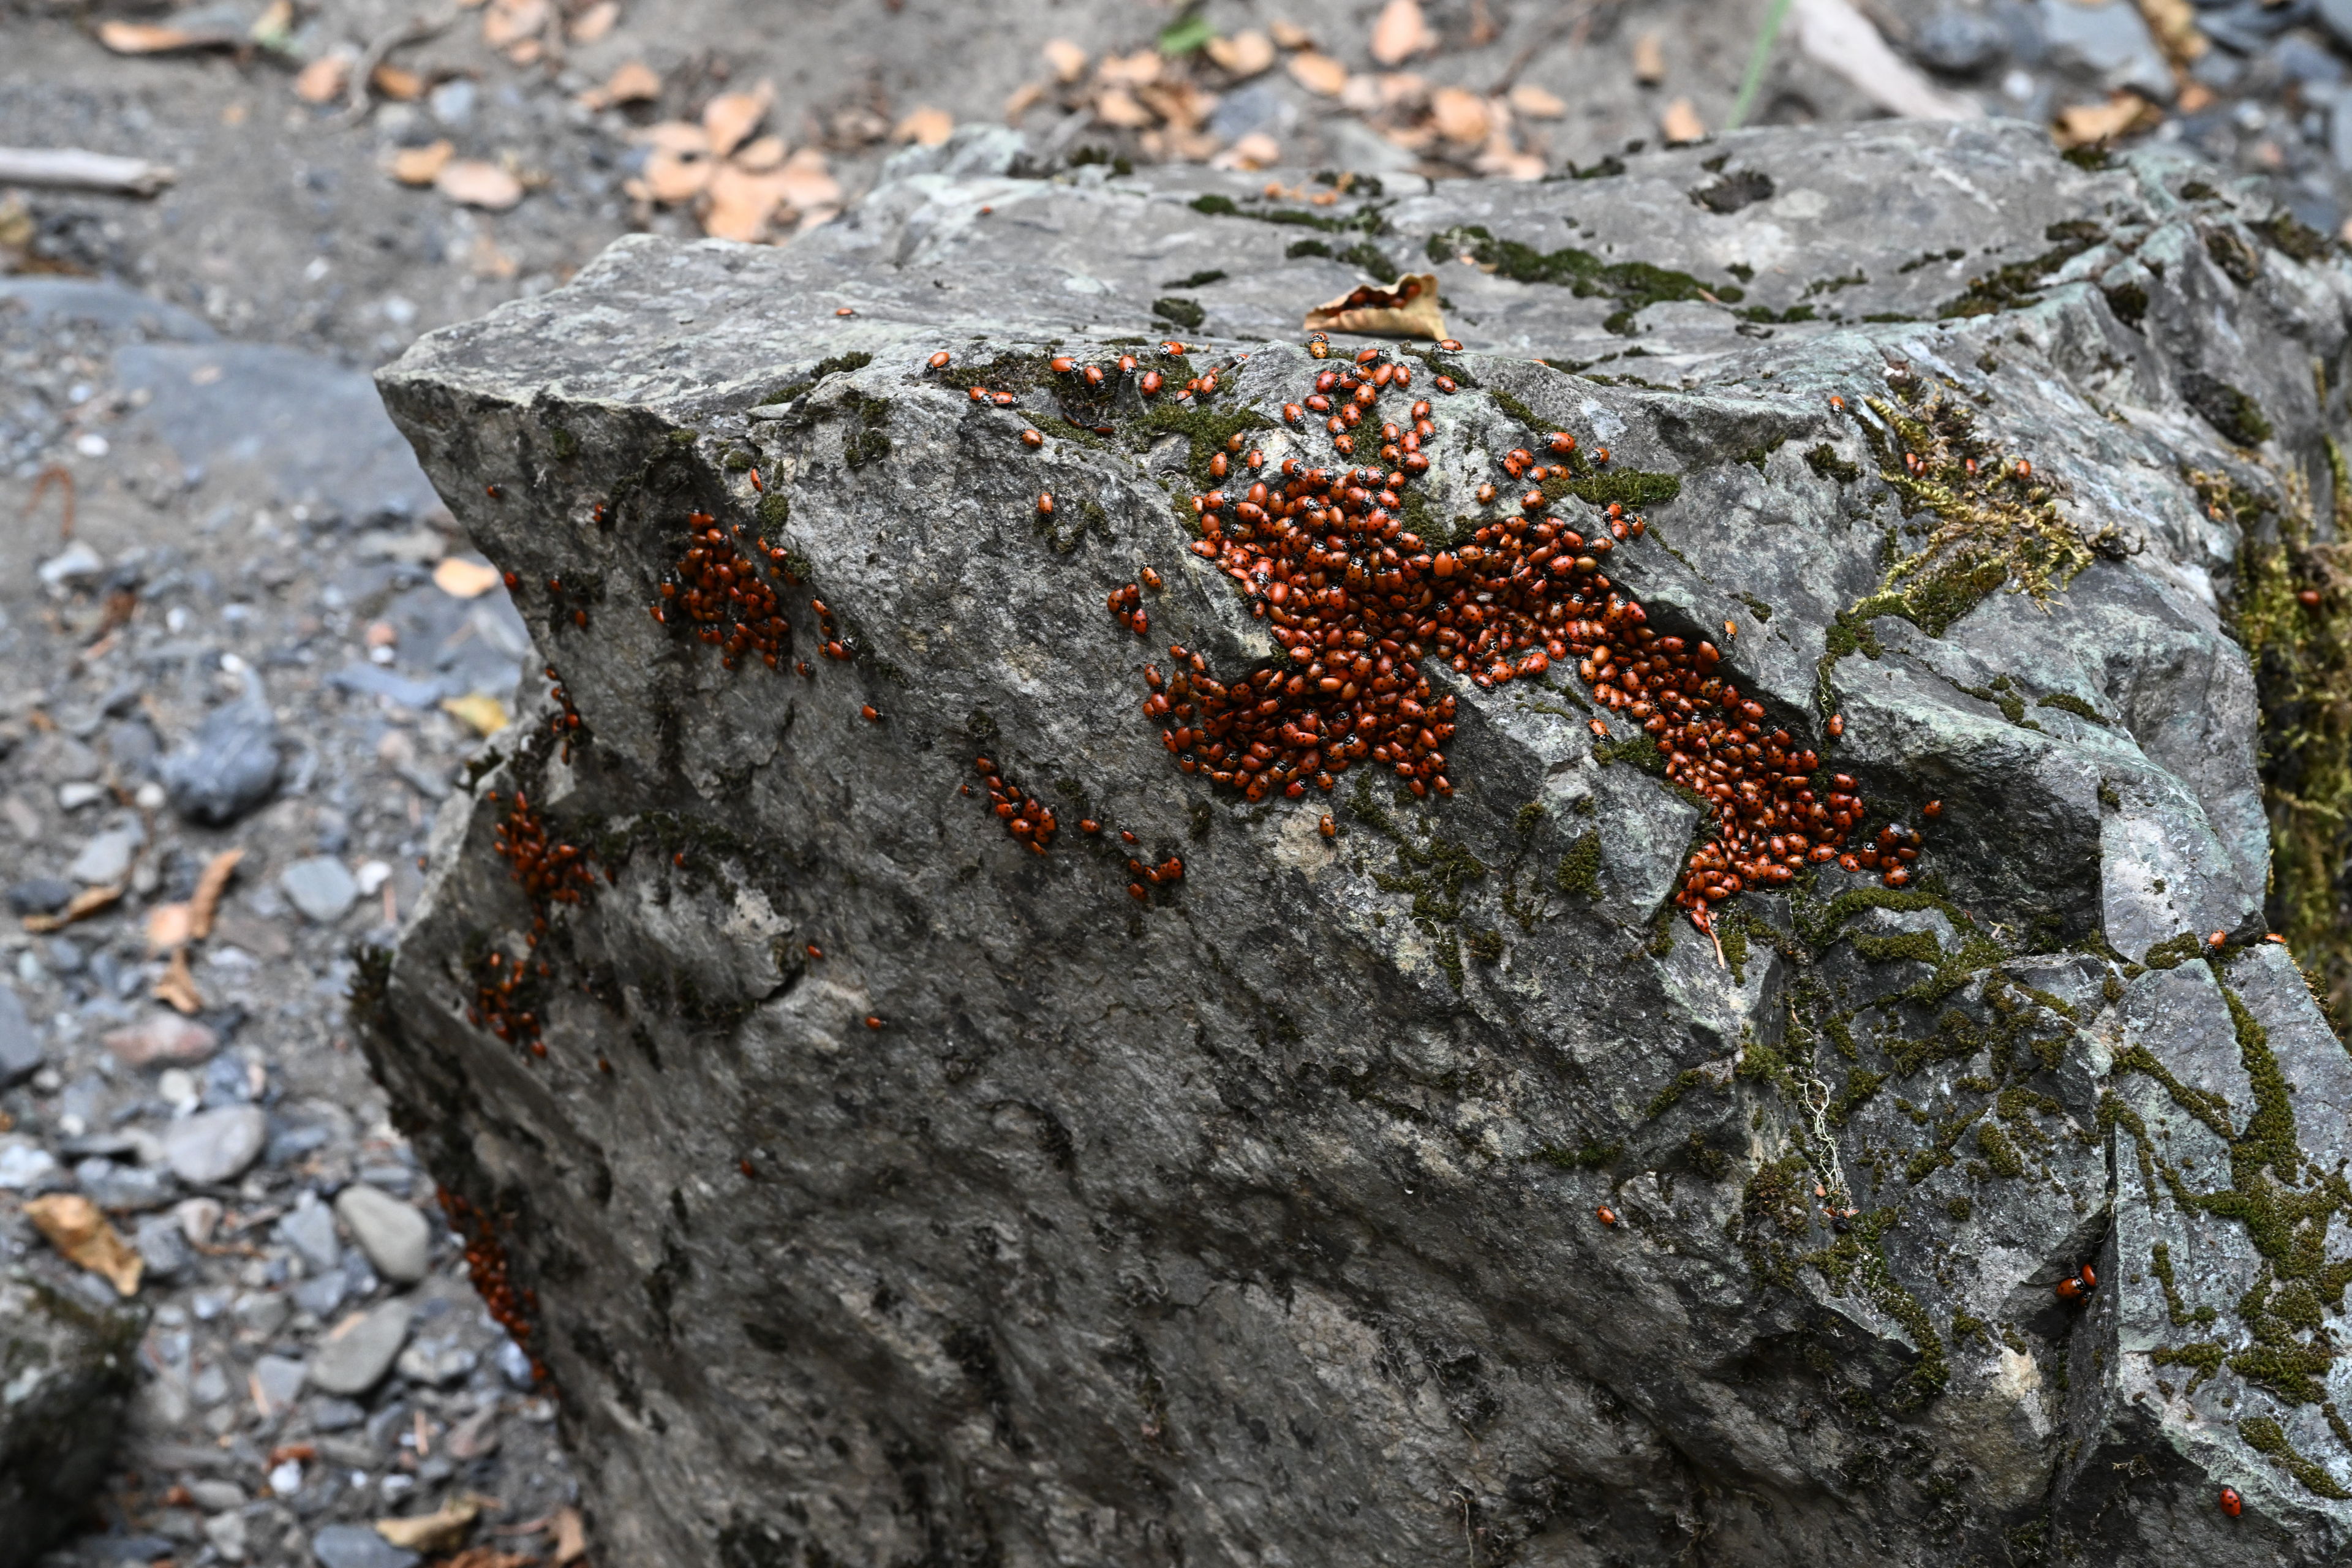 We came upon tons of ladybugs clustered around the ends of logs and rocks on the Deafy Glade Trail, 8W26, in Mendocino National Forest.